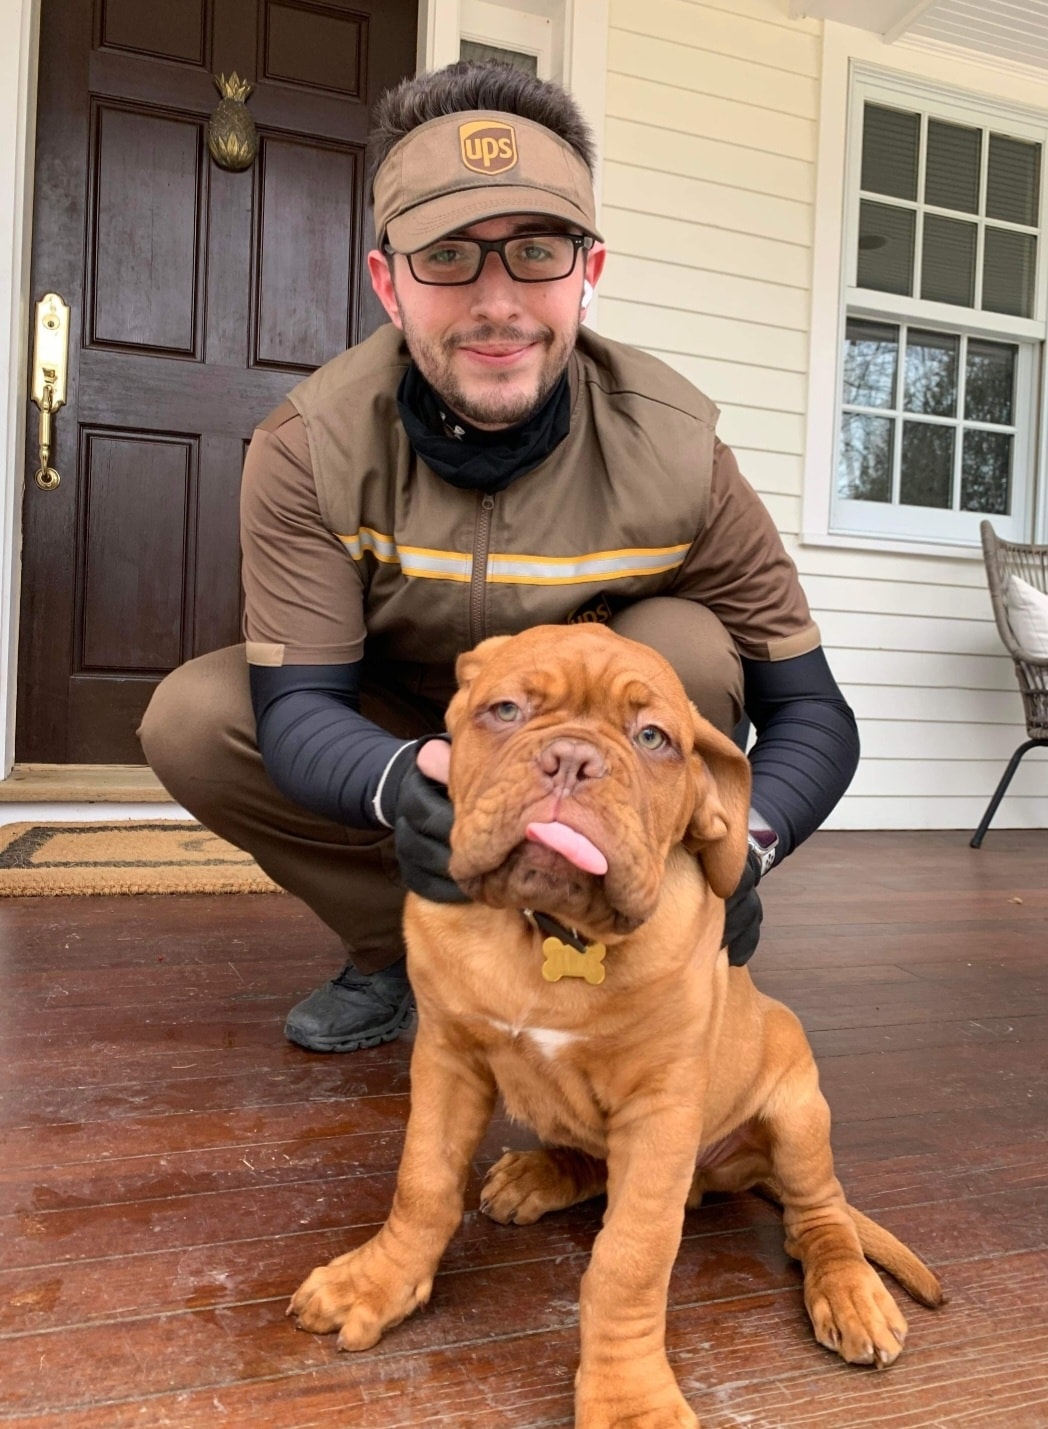 UPS driver squats on porch holding up face of puppy with his tongue out.